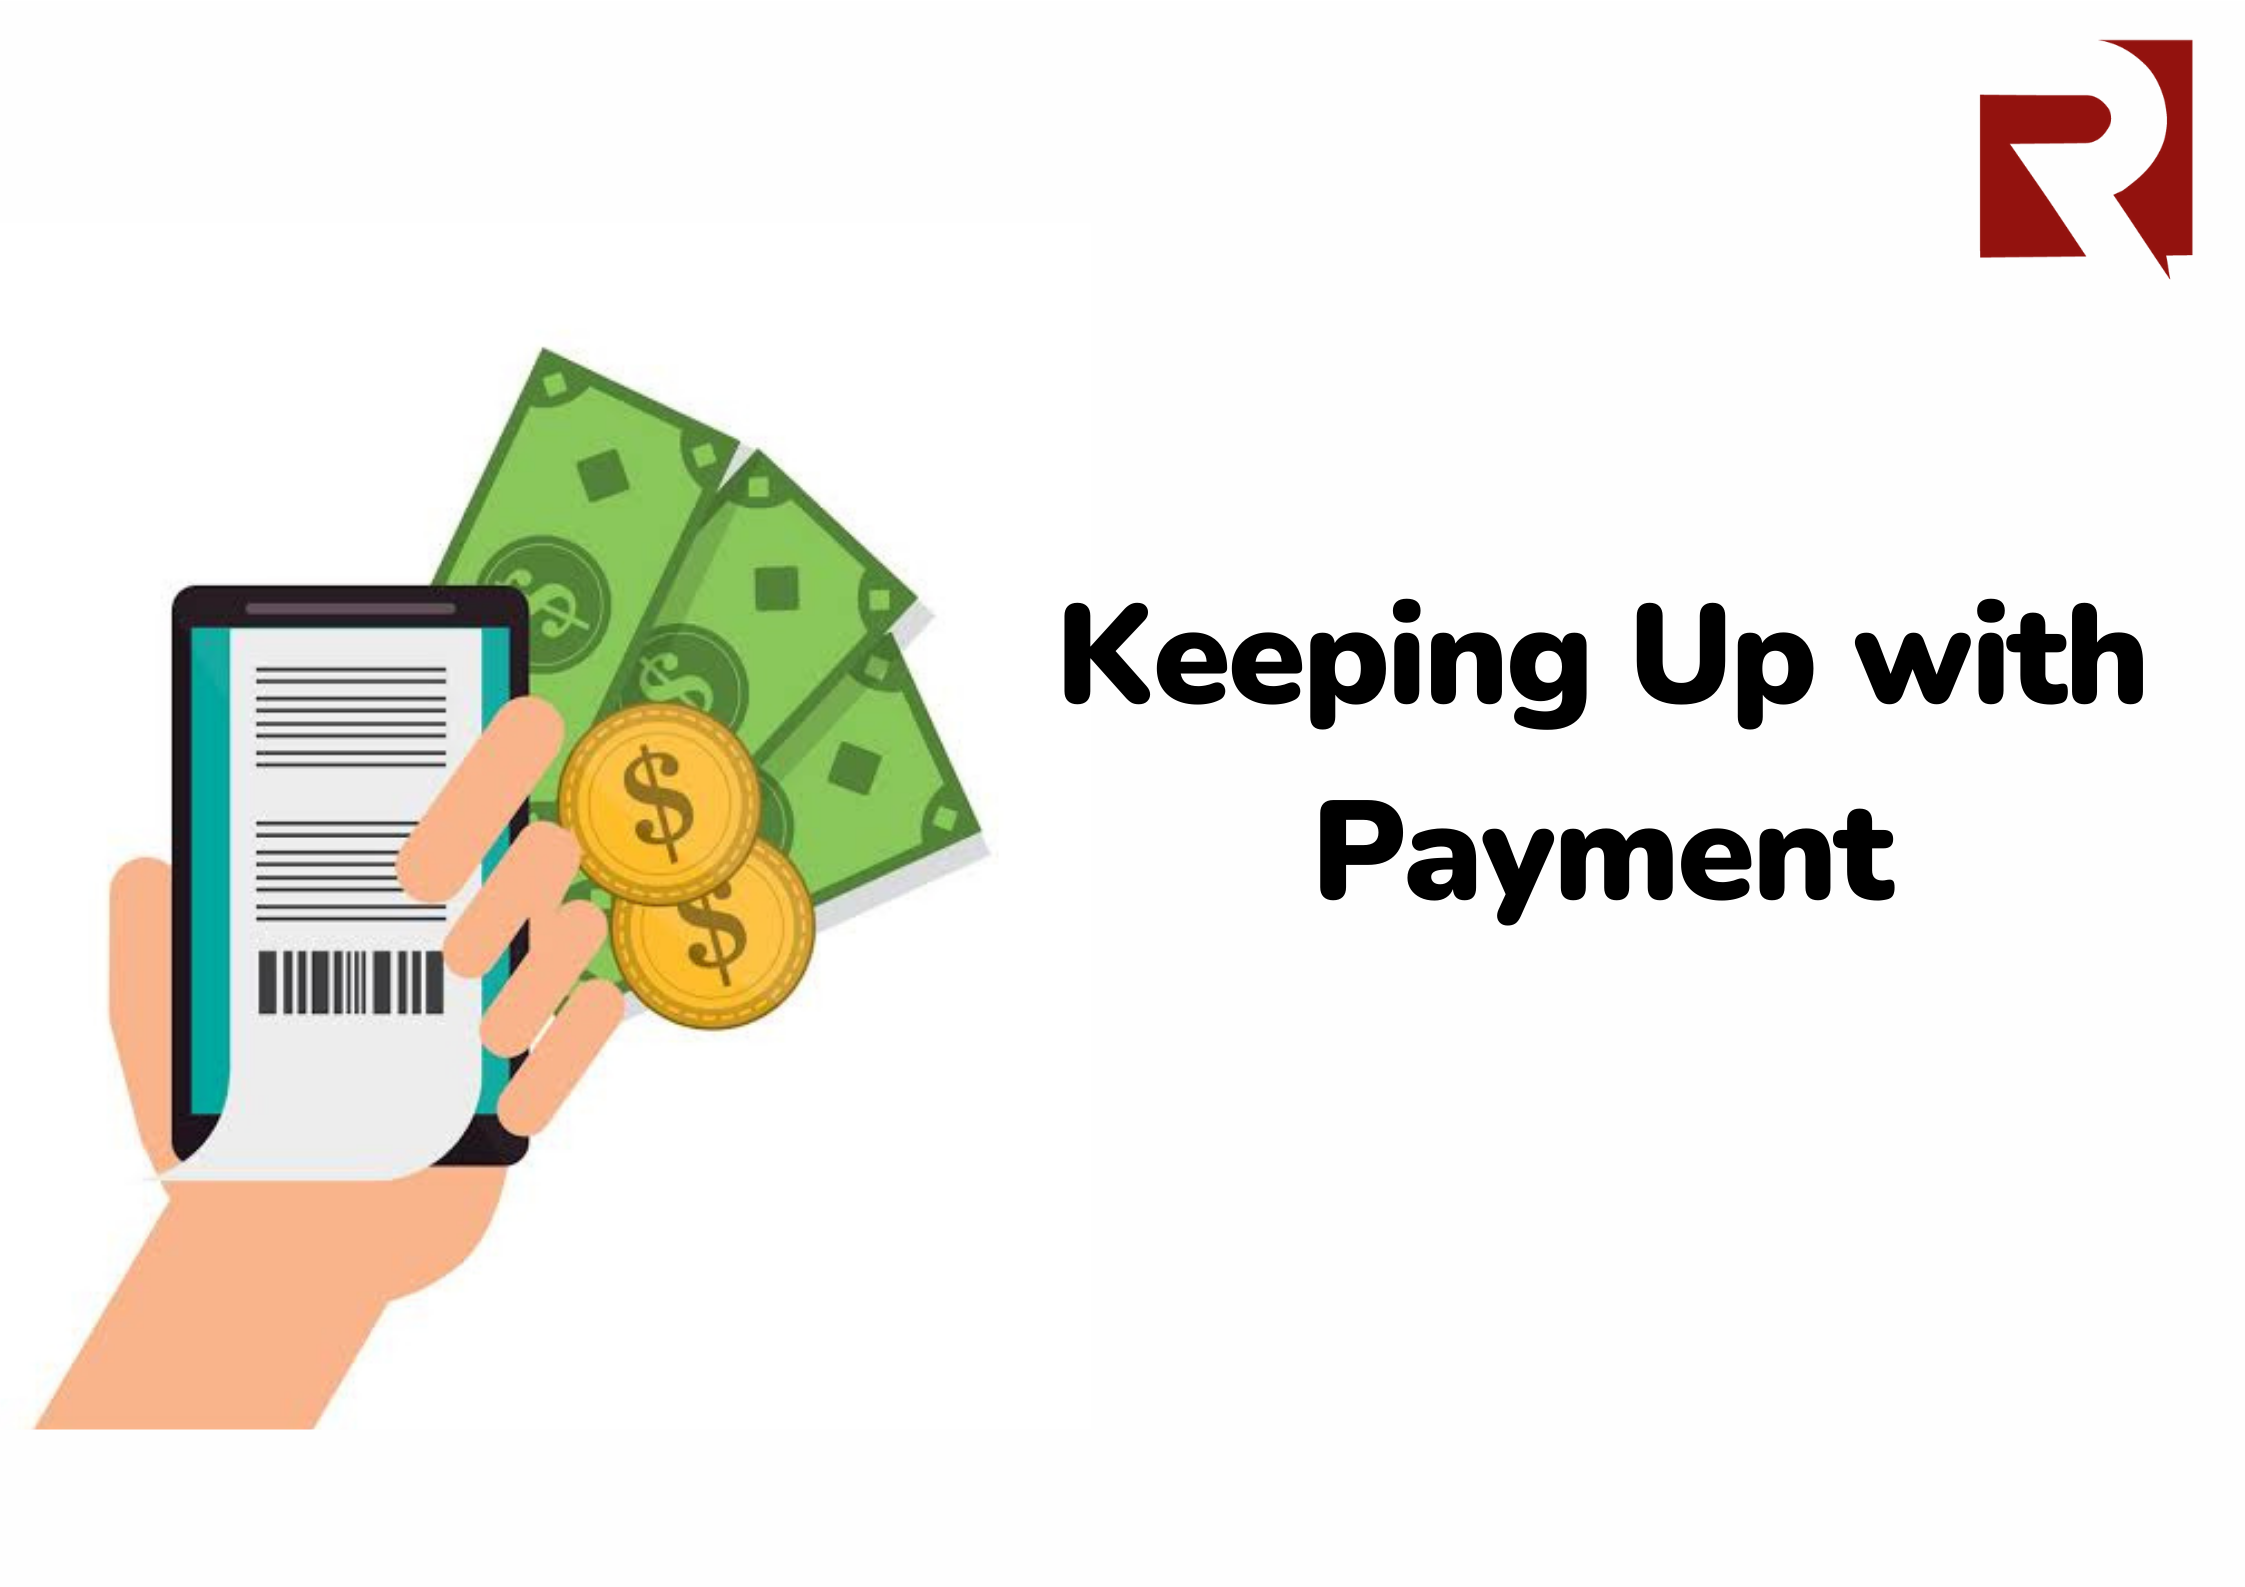 Keeping Up with Payment